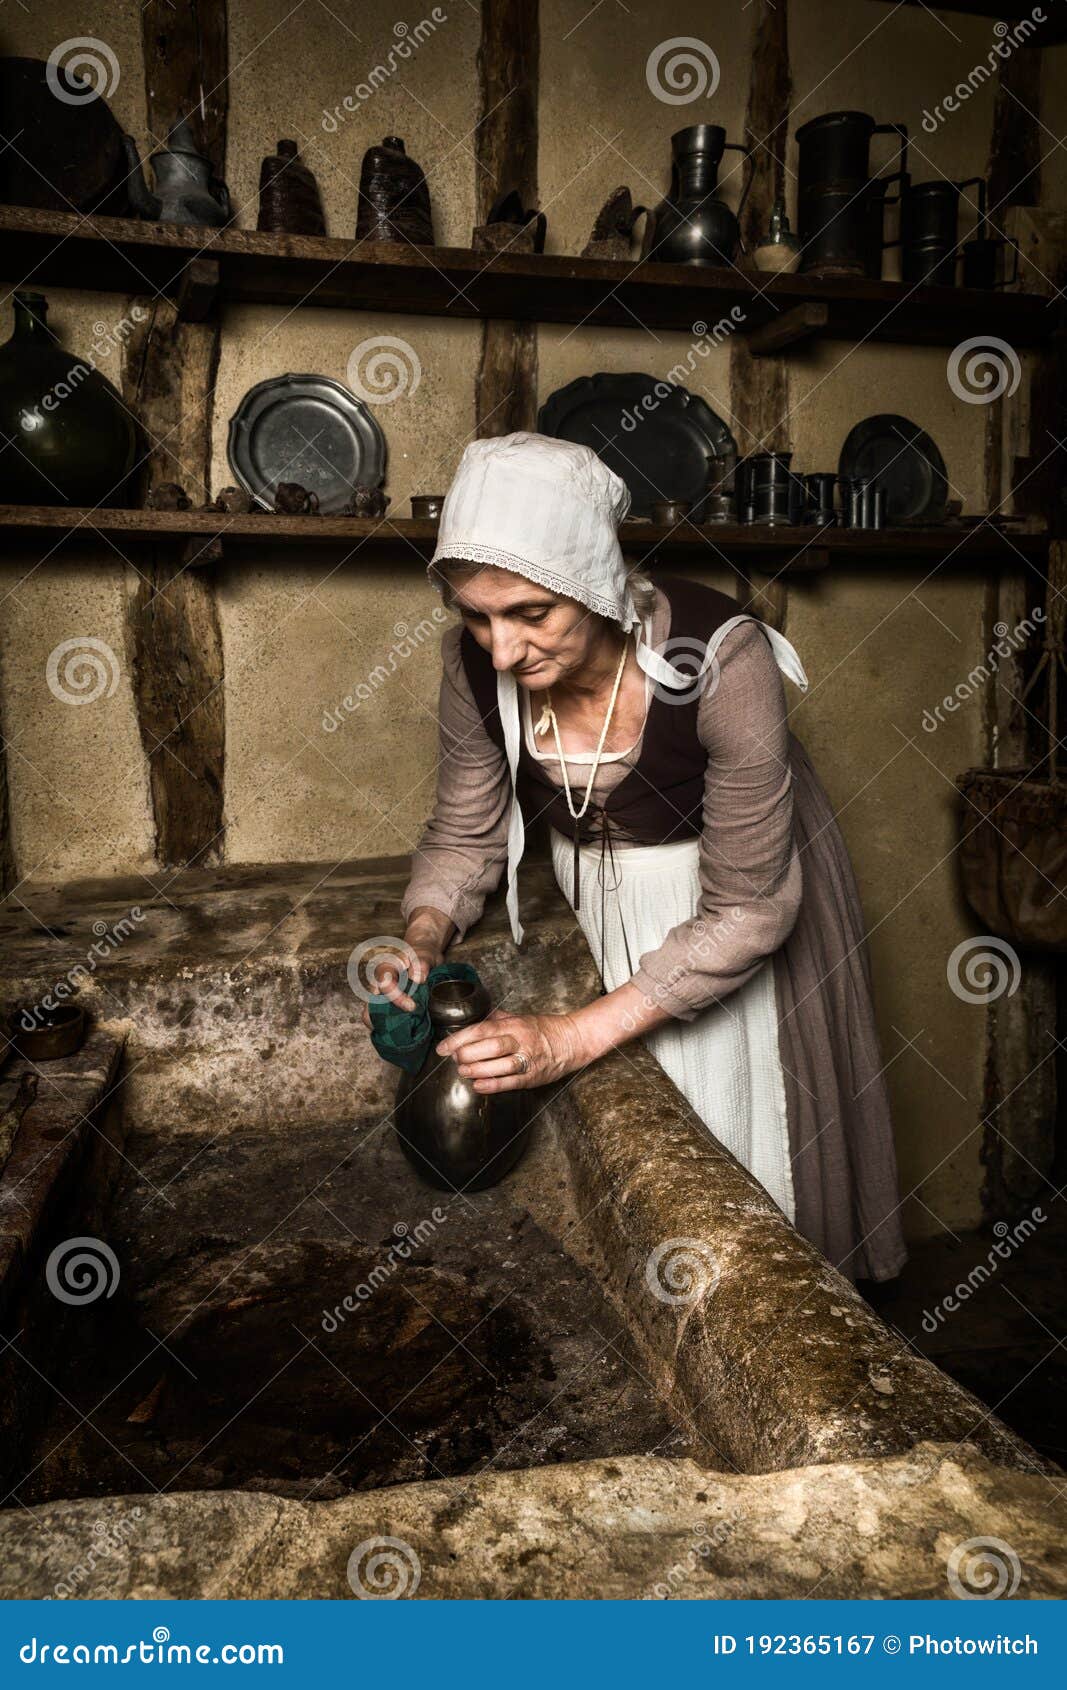 Medieval Portrait of a Maid Cleaning in Kitchen Stock Image - Image of  historic, clothing: 192365167